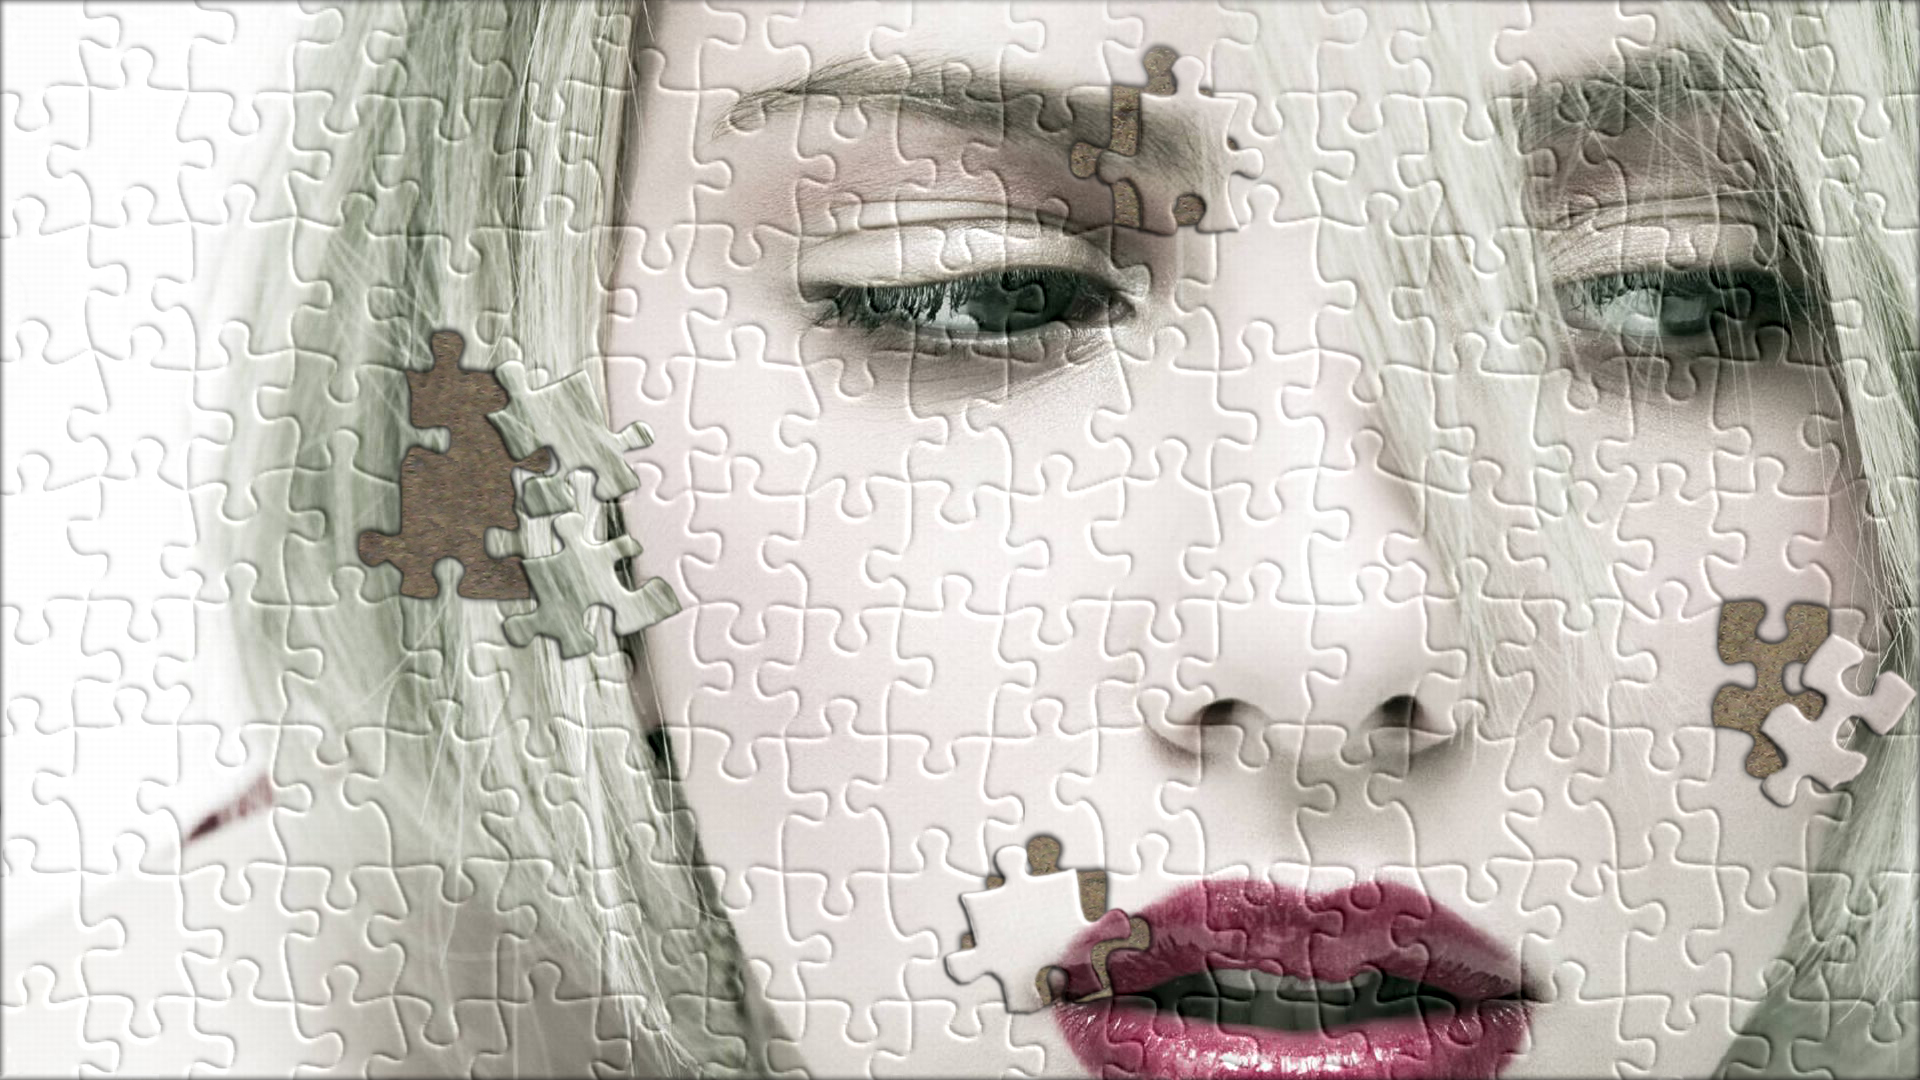 Scarlett Johansson puzzle wallpaper: A stunning celebrity image with puzzle pieces artfully arranged.